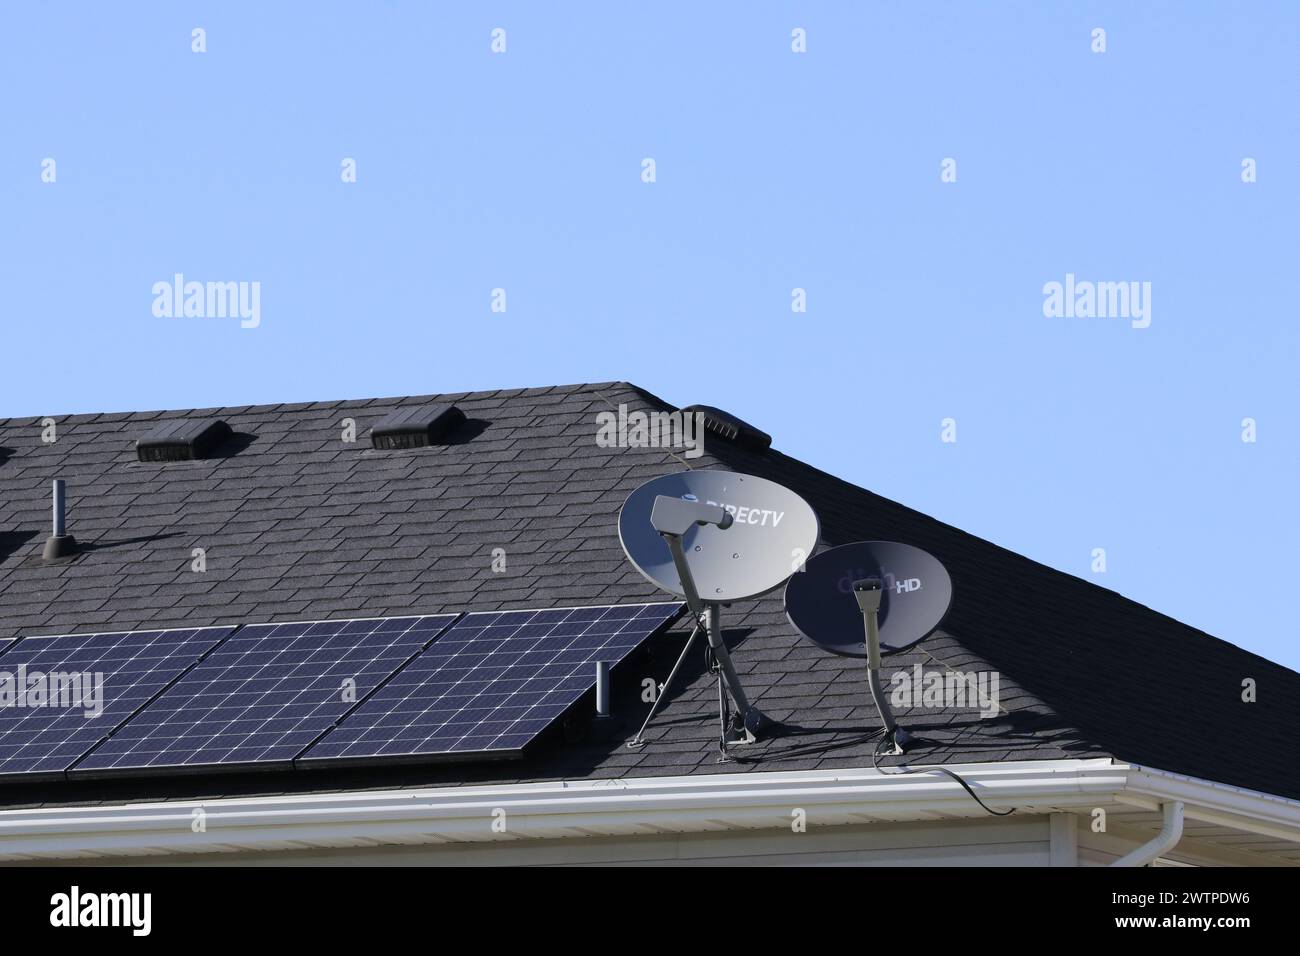 Direct TV satellite Dishes on a roof with solar panels Stock Photo